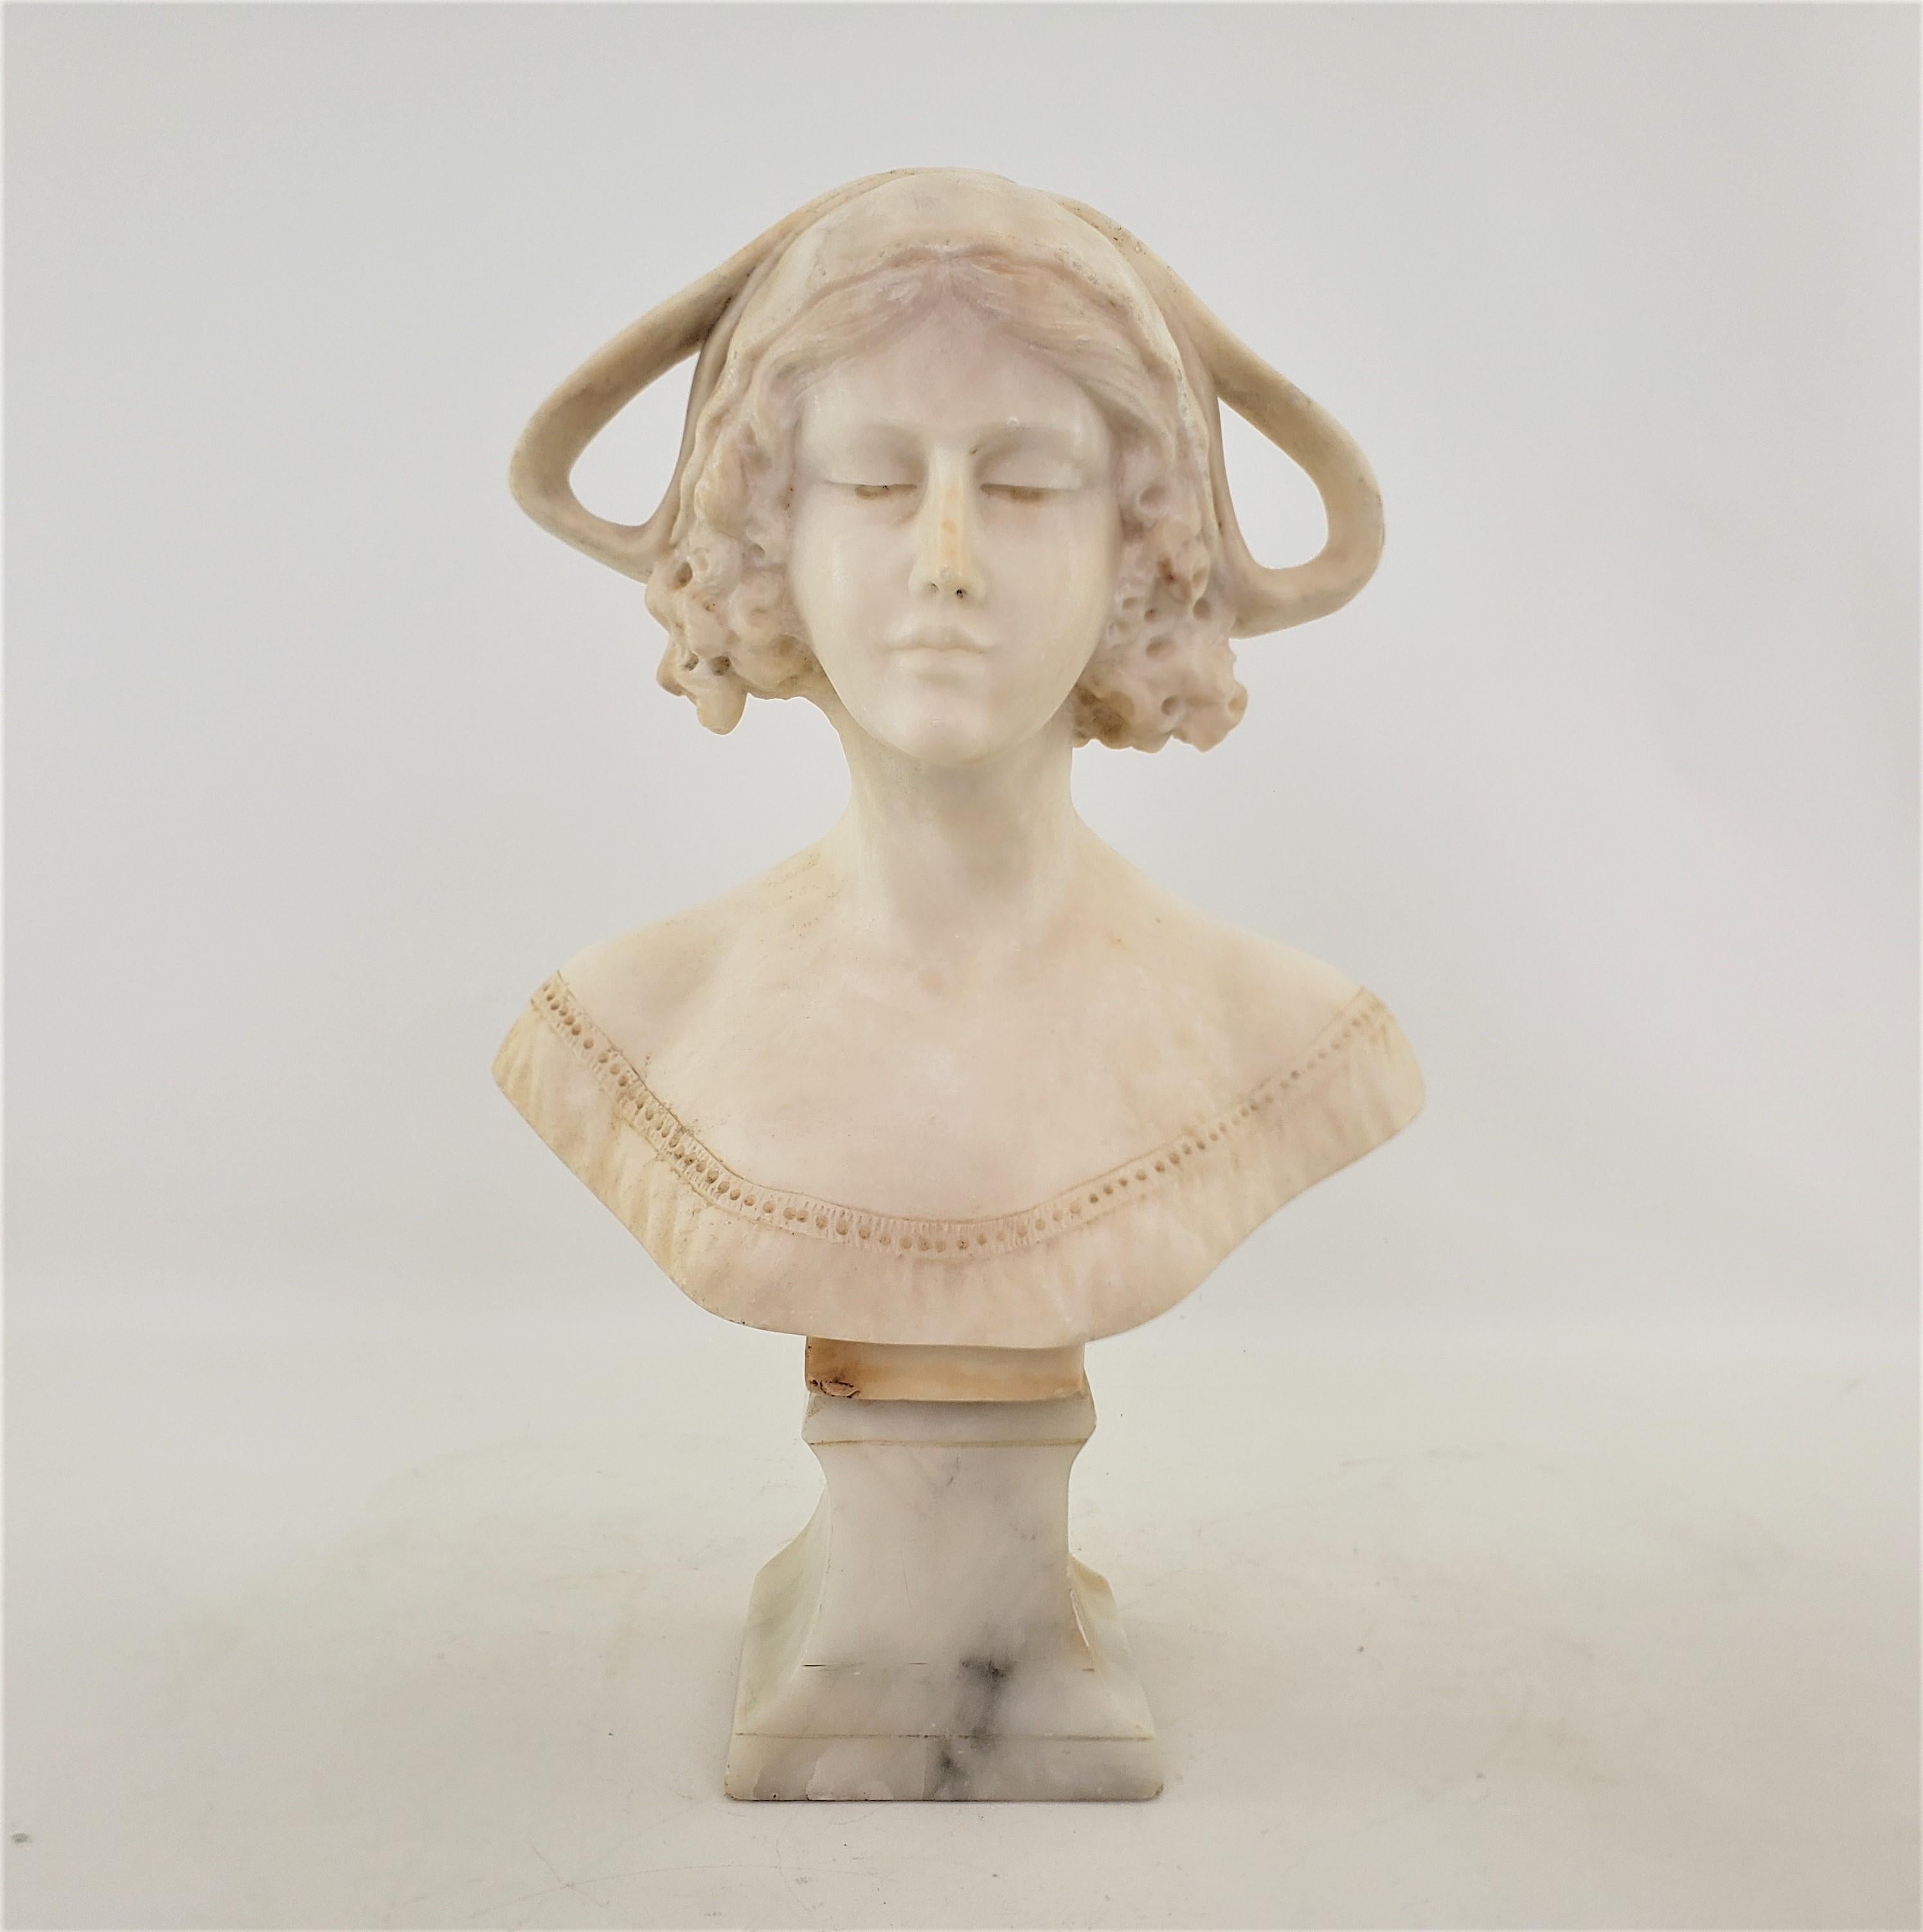 Antique Art Deco Hand-Carved Italian Bust or Sculpture of a Young Female & Base In Good Condition For Sale In Hamilton, Ontario